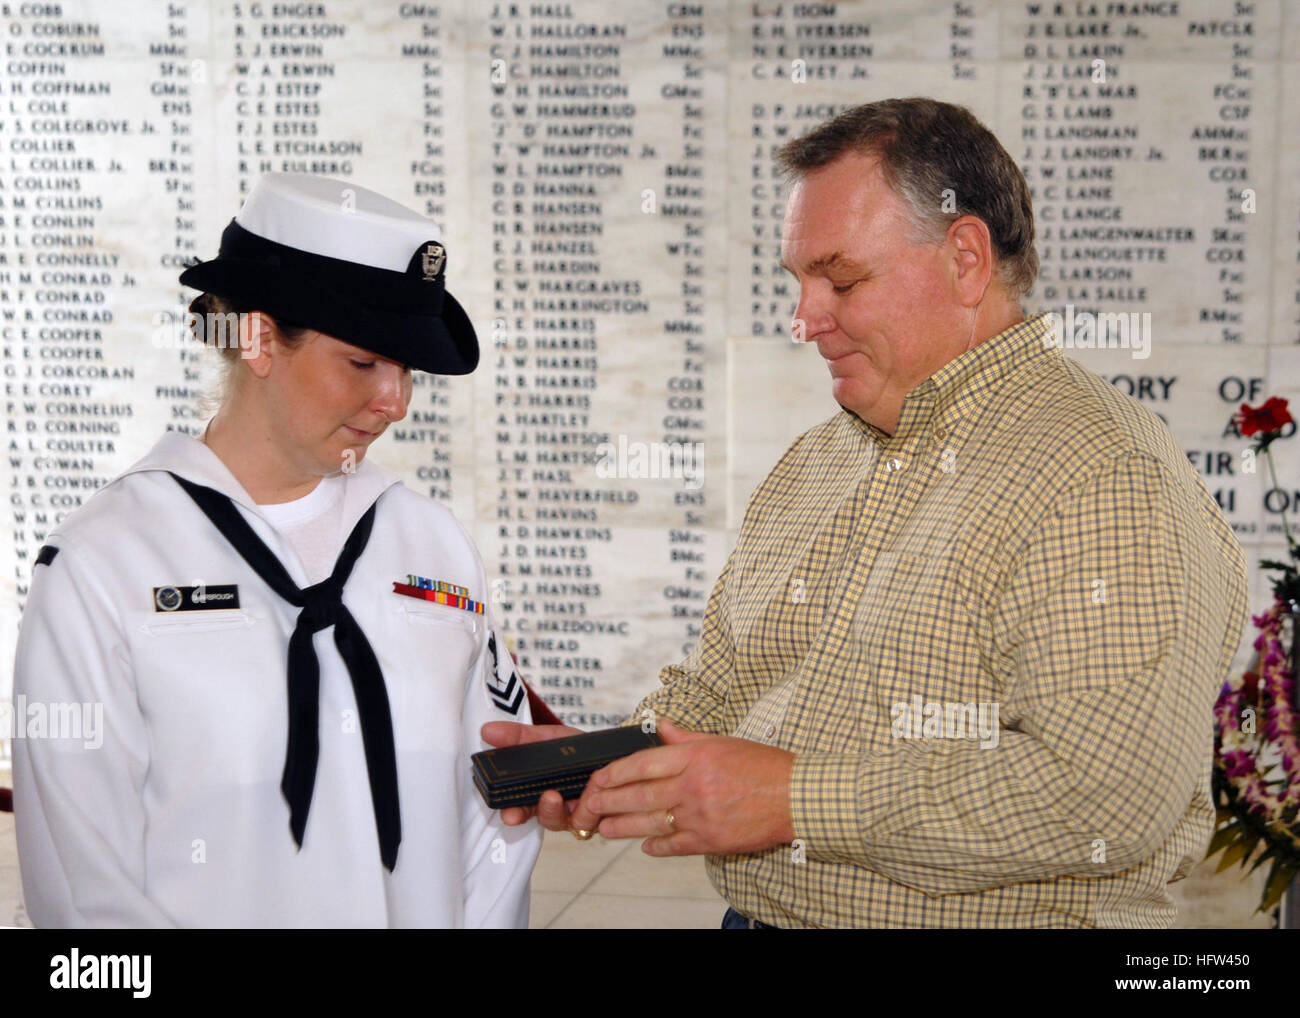 071207-N-5476H-234  PEARL HARBOR  (Dec. 7, 2007) Ð Tim Hodges presents his niece Cryptologic Technician Interpretive 2nd Class Bailey Sharbrough with the Purple Heart awarded to her great uncle Garris Hodges aboard the USS Arizona Memorial.  CTI2 Sharbrough reenlisted 66 years after her great uncle, Fireman 2nd Class Garris Hodges, perished along with 1,177 other Sailors and Marines on USS Arizona (BB 39).   U.S. Navy Photo by Mass Communication Specialist 2nd Class Michael Hight. US Navy 071207-N-5476H-234 Tim Hodges presents his niece, Cryptologic Technician Interpretive (CTI) 2nd Class Bail Stock Photo